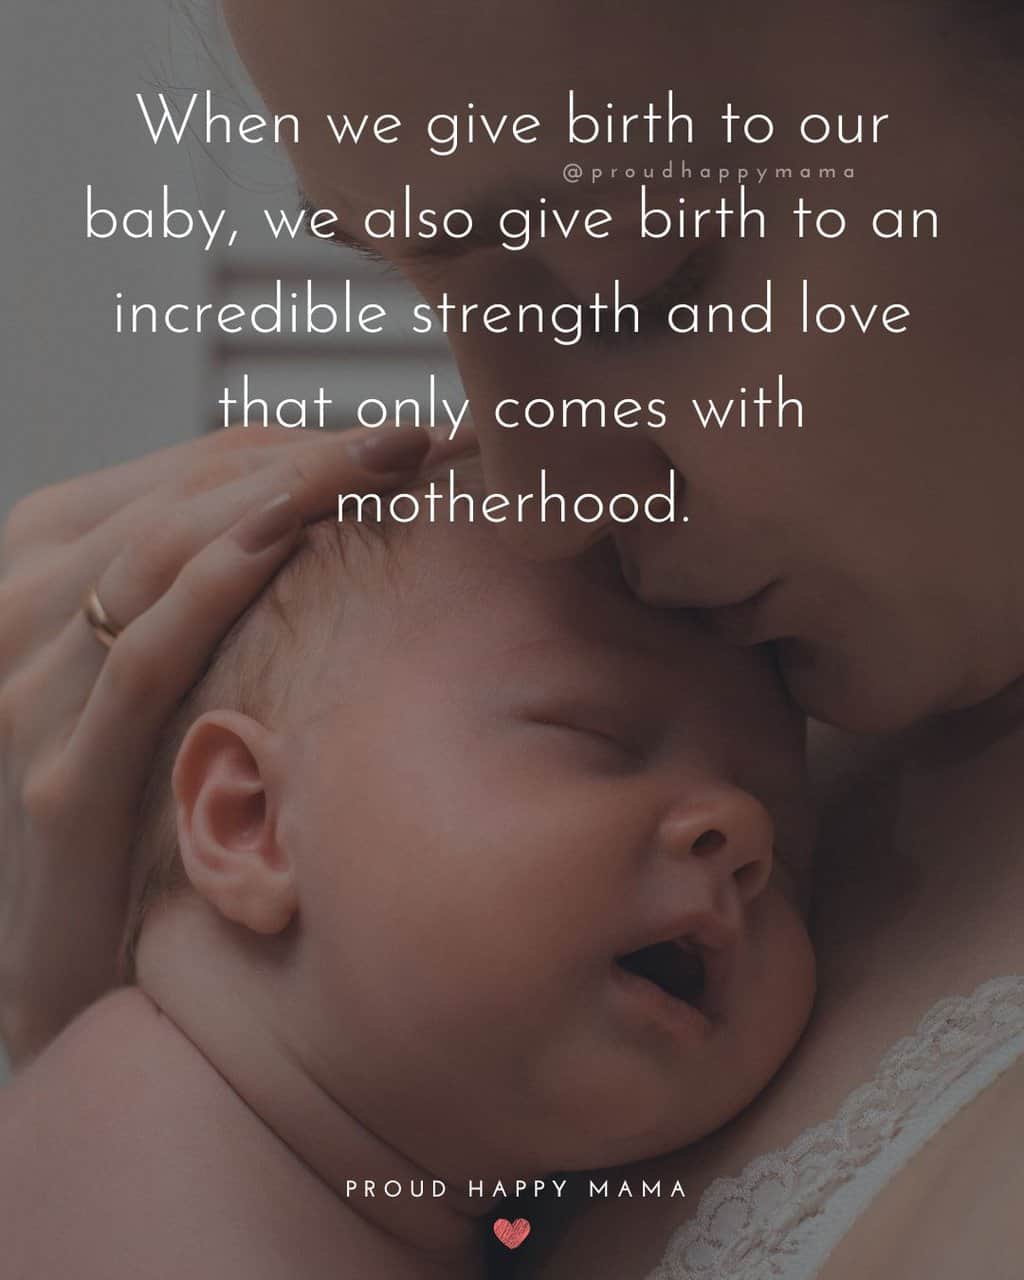 Cute Pregnancy Quotes | When we give birth to our baby, we also give birth to an incredible strength and love that only comes with motherhood.